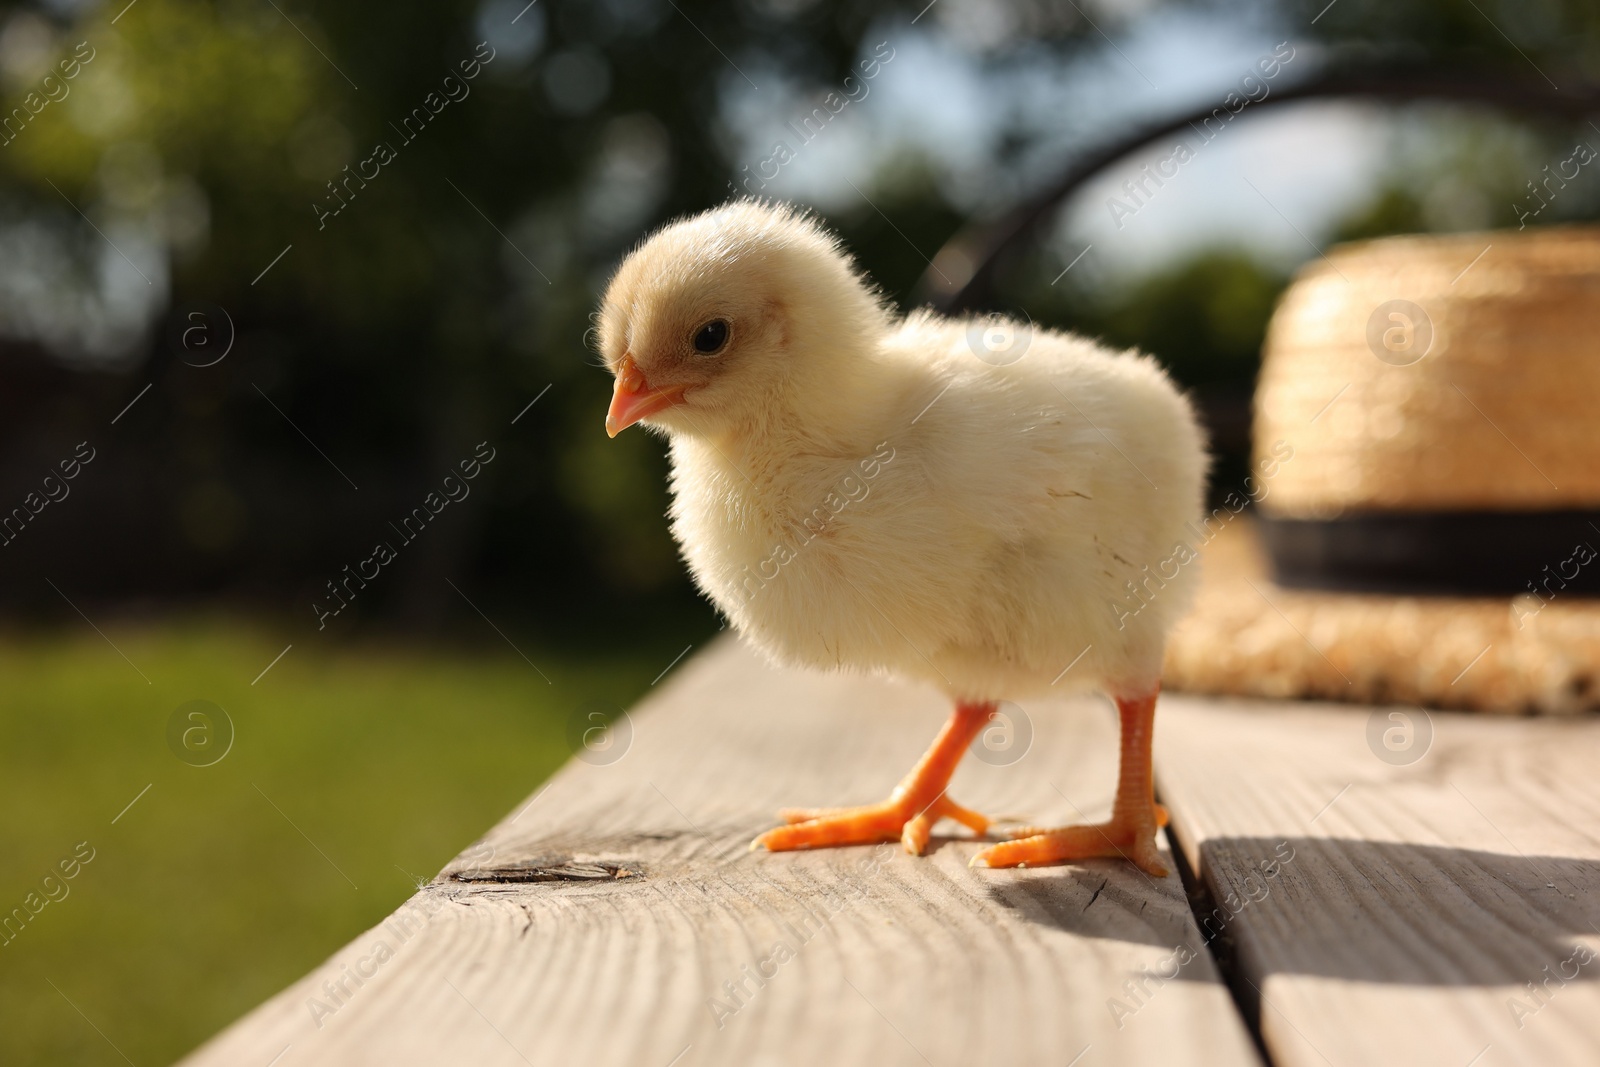 Photo of Cute chick on wooden surface on sunny day, closeup. Baby animal